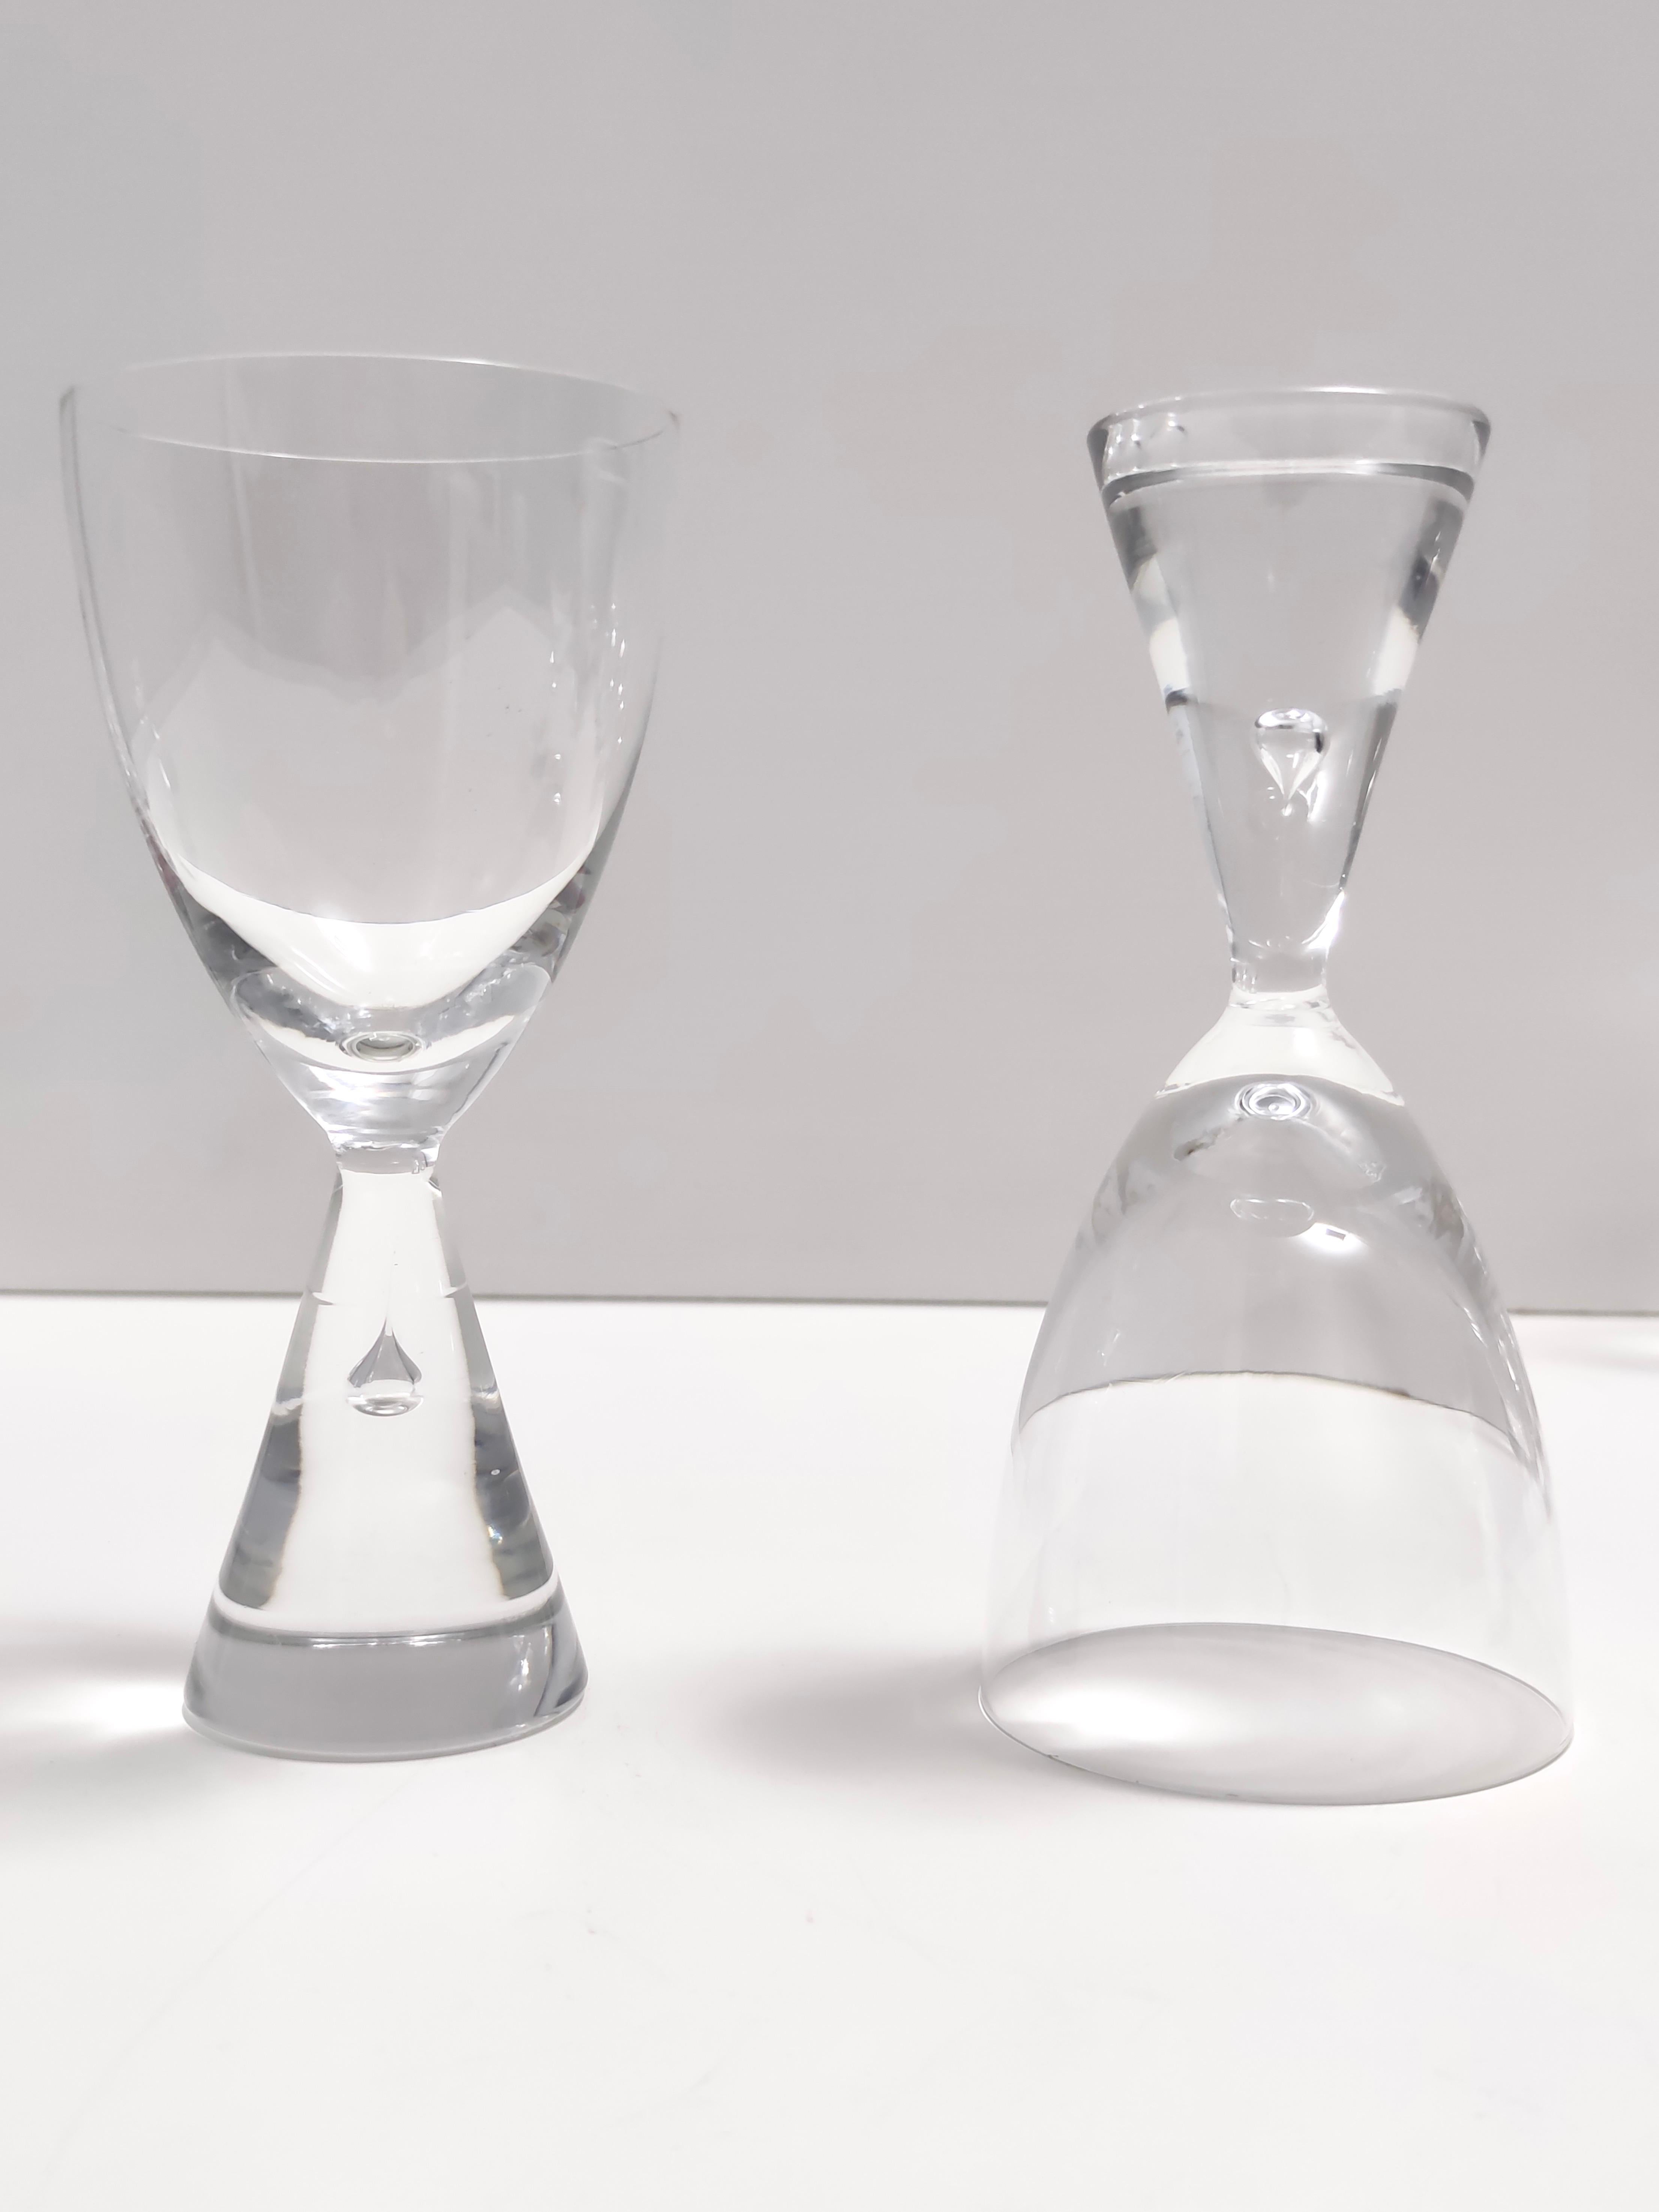 Mid-20th Century Set of Twelve Crystal Drinking Glasses by Bent Ole Severin for Holmegaard, 1958